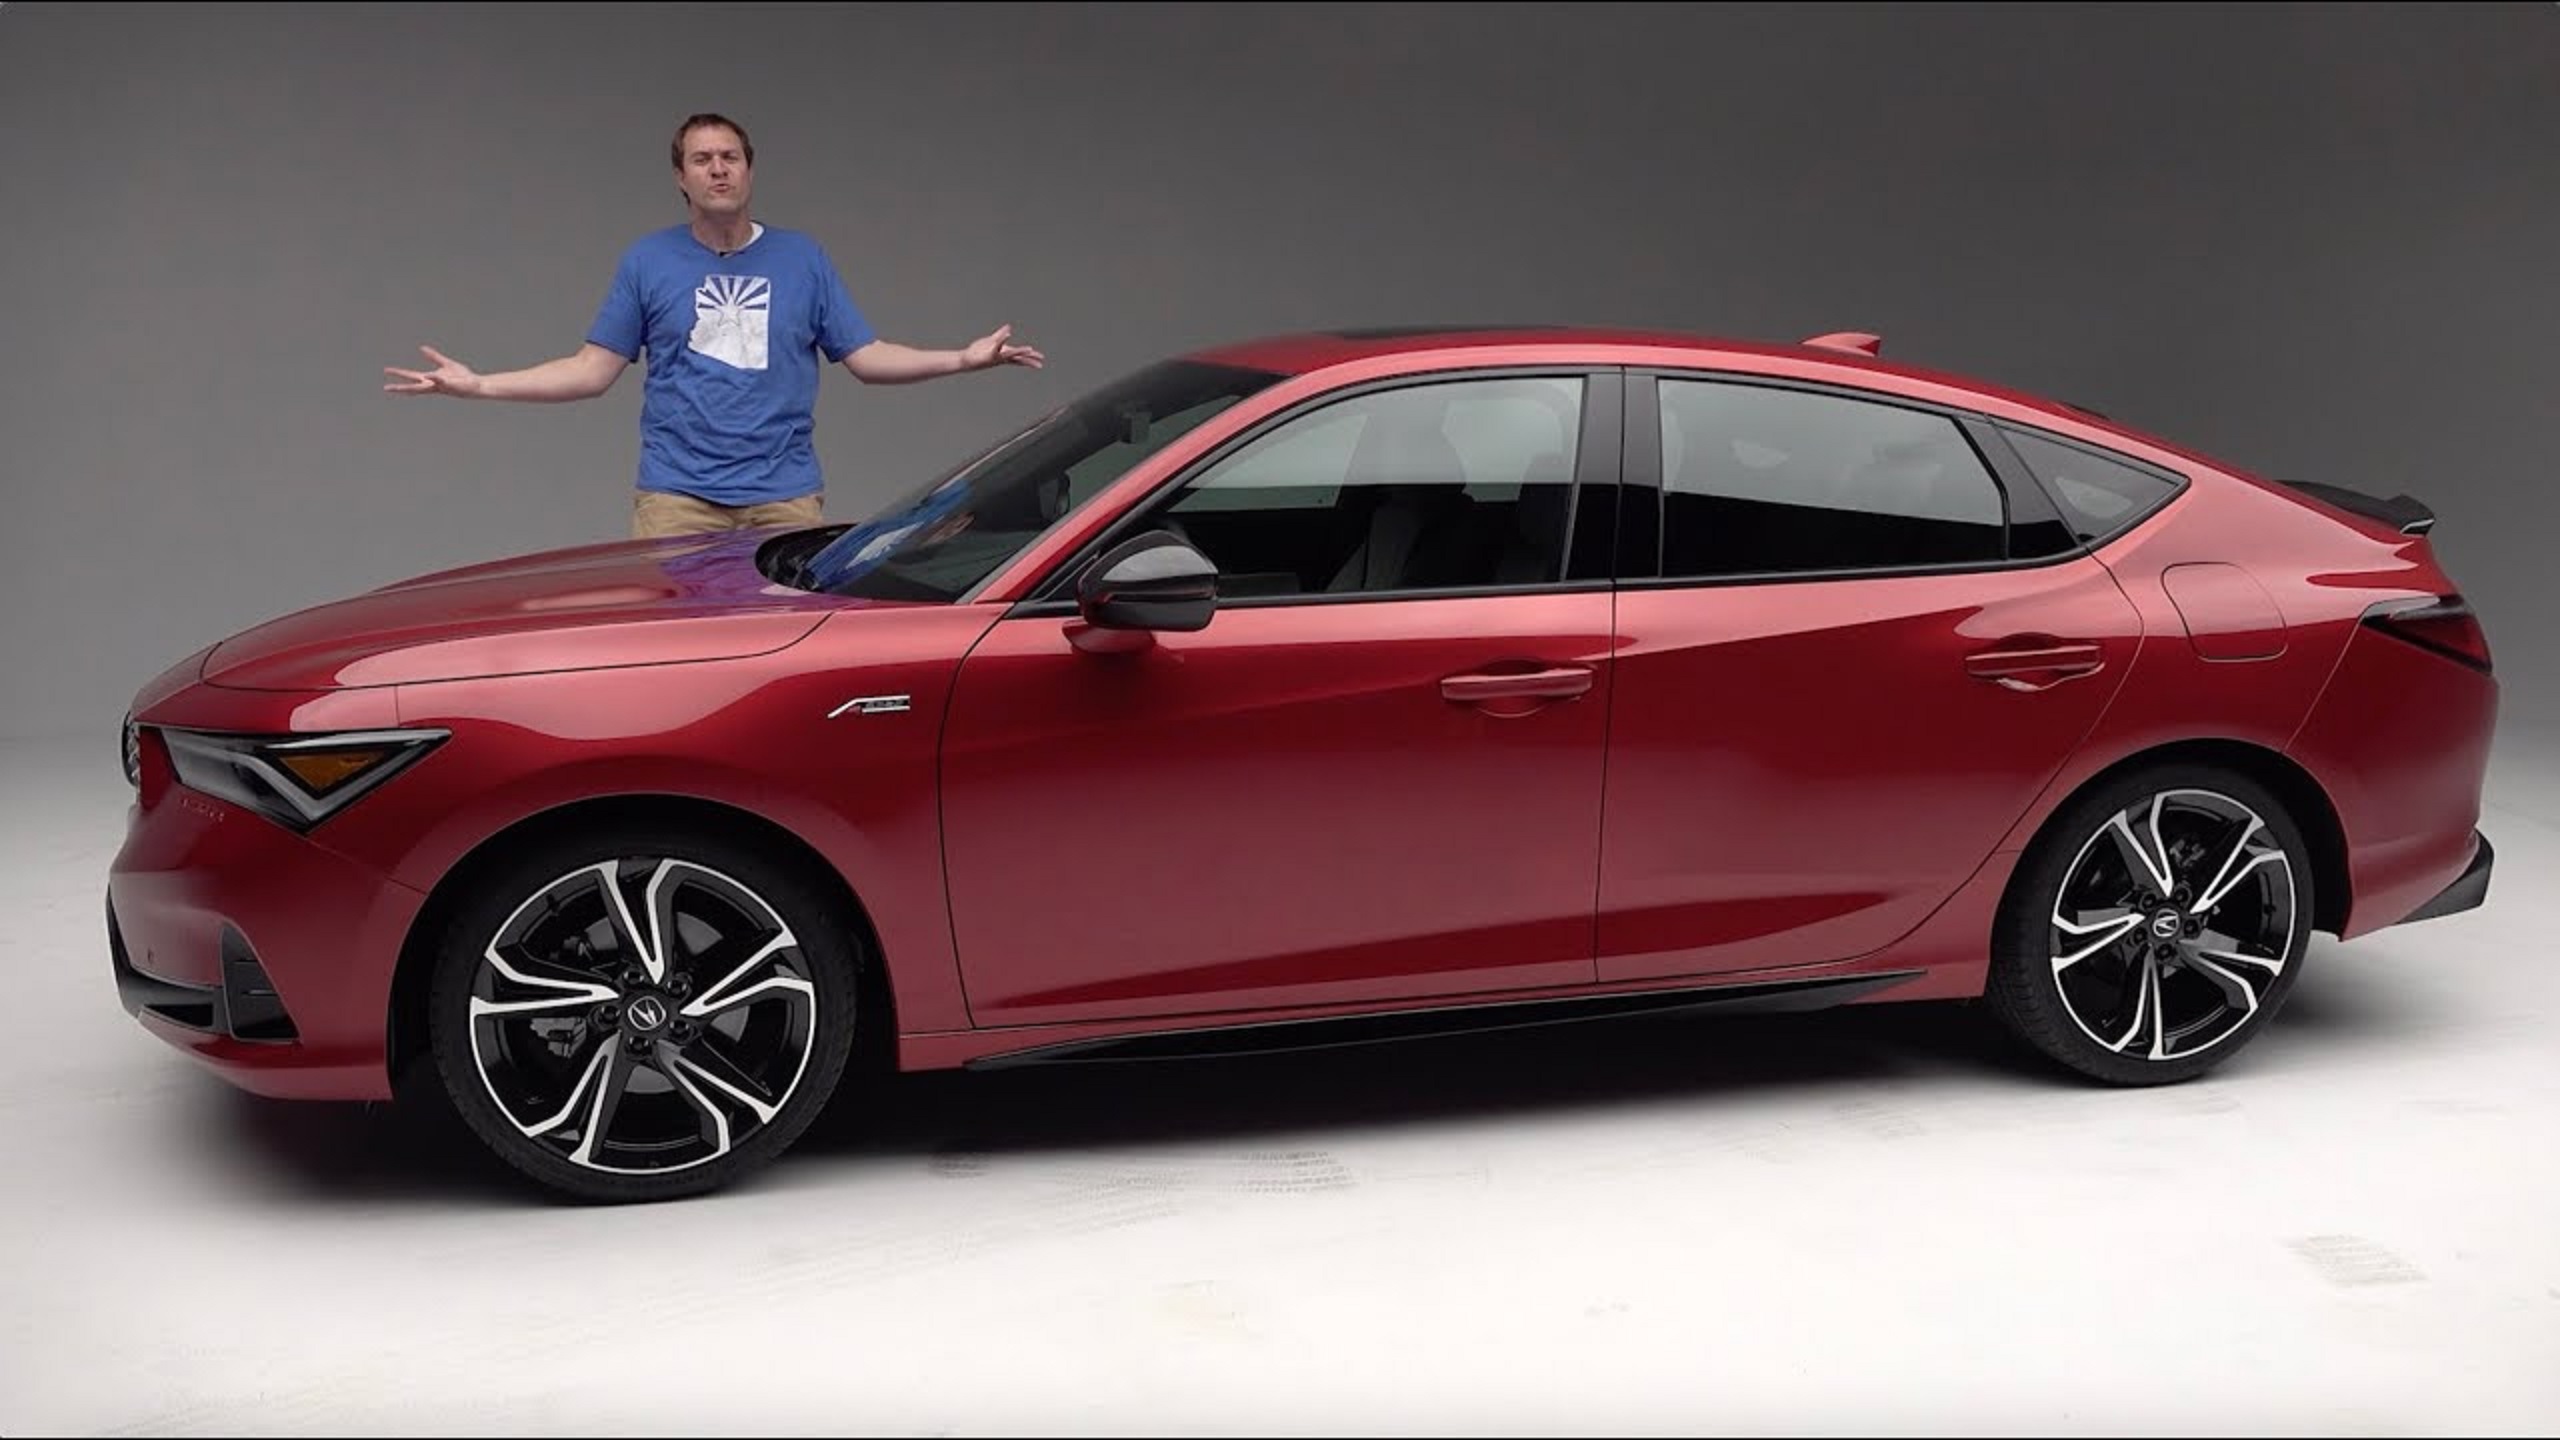 Doug DeMuro with a maroon 2023 Acura Integra A-Spec with Technology Package